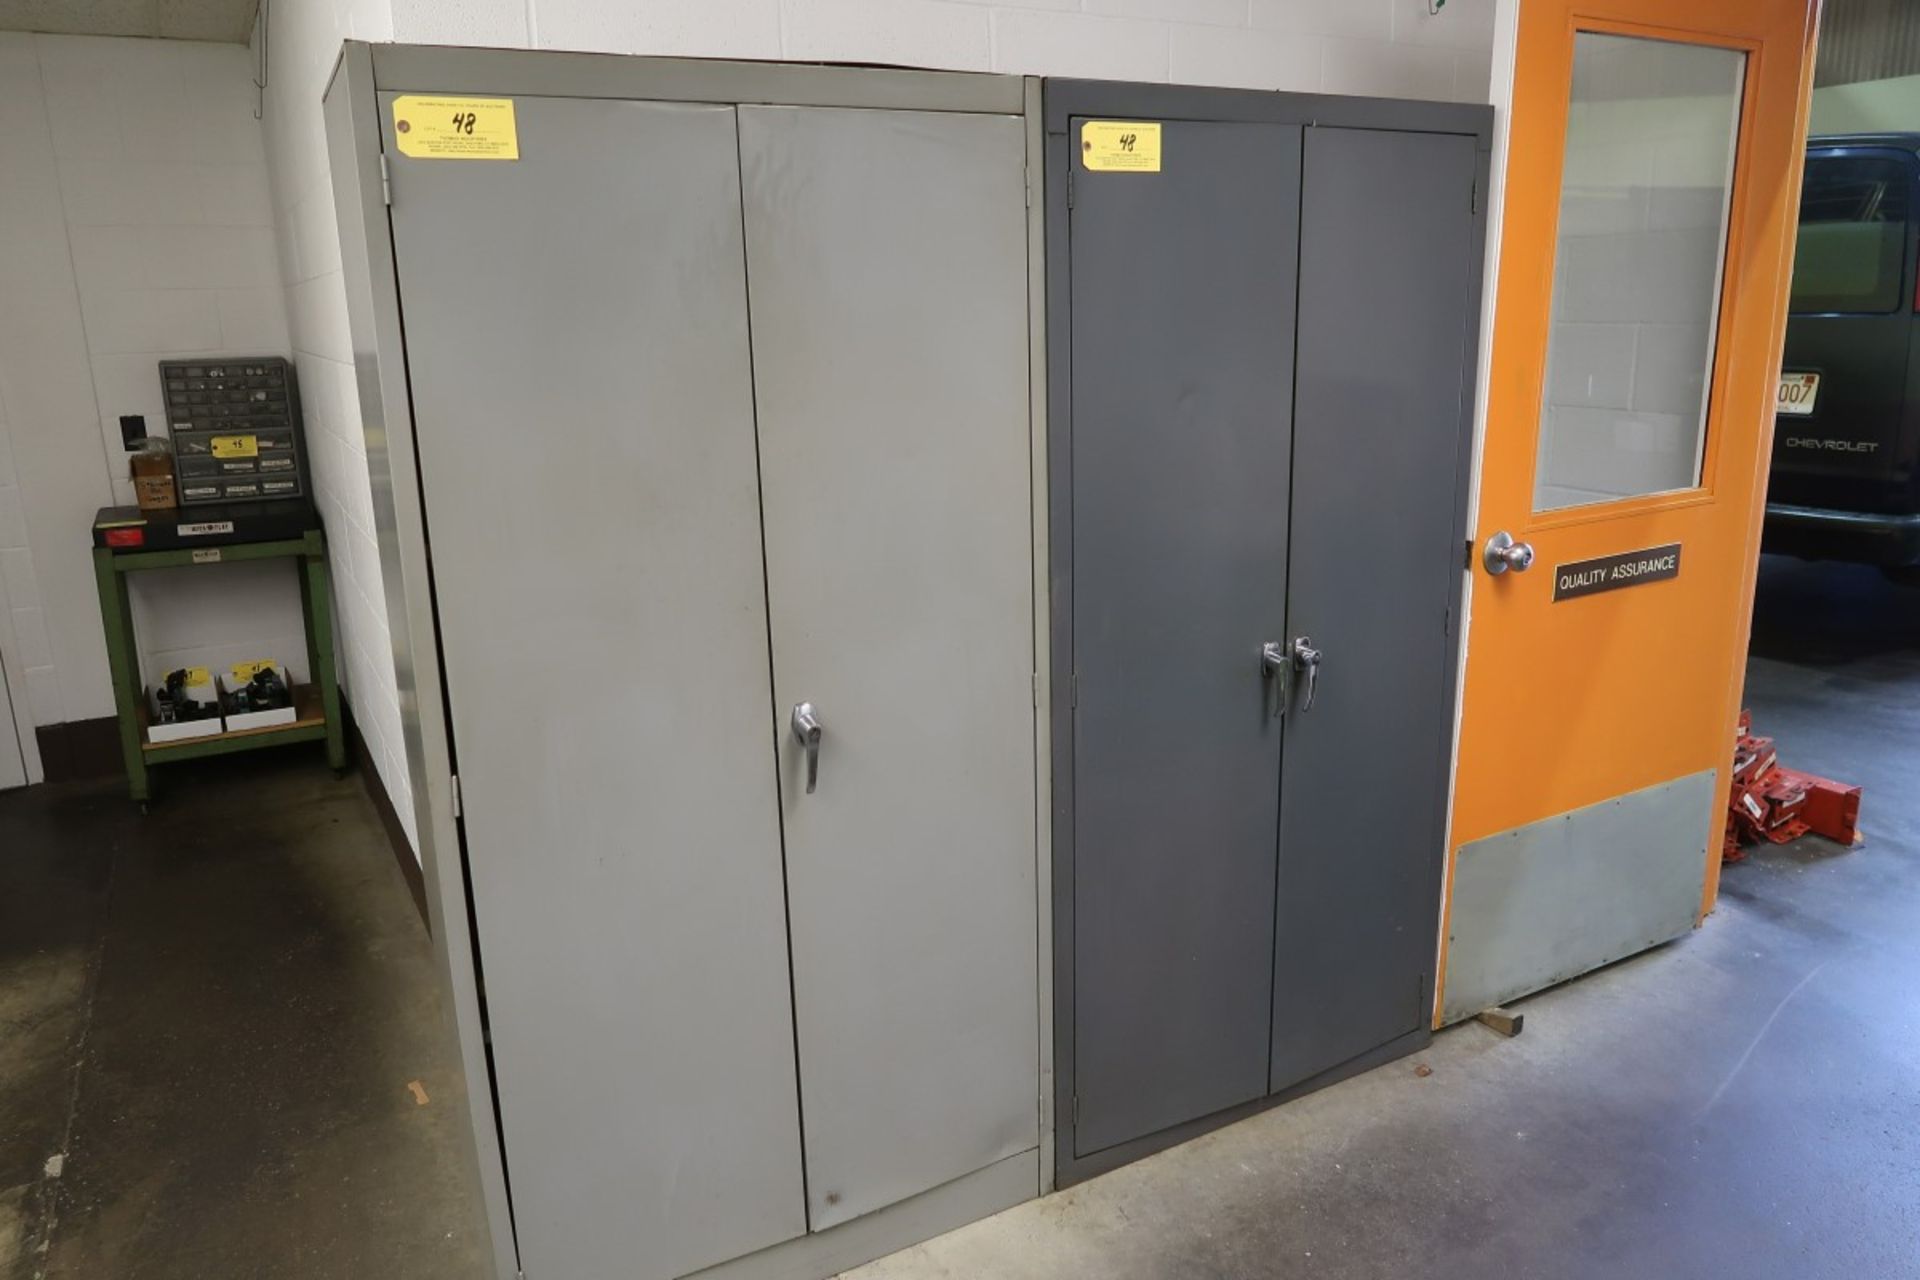 (2) STORAGE CABINETS W/ CONTENTS INCLUDING: ASSORTED INSPECTION GAGES, DEPTH MICS, DIAL